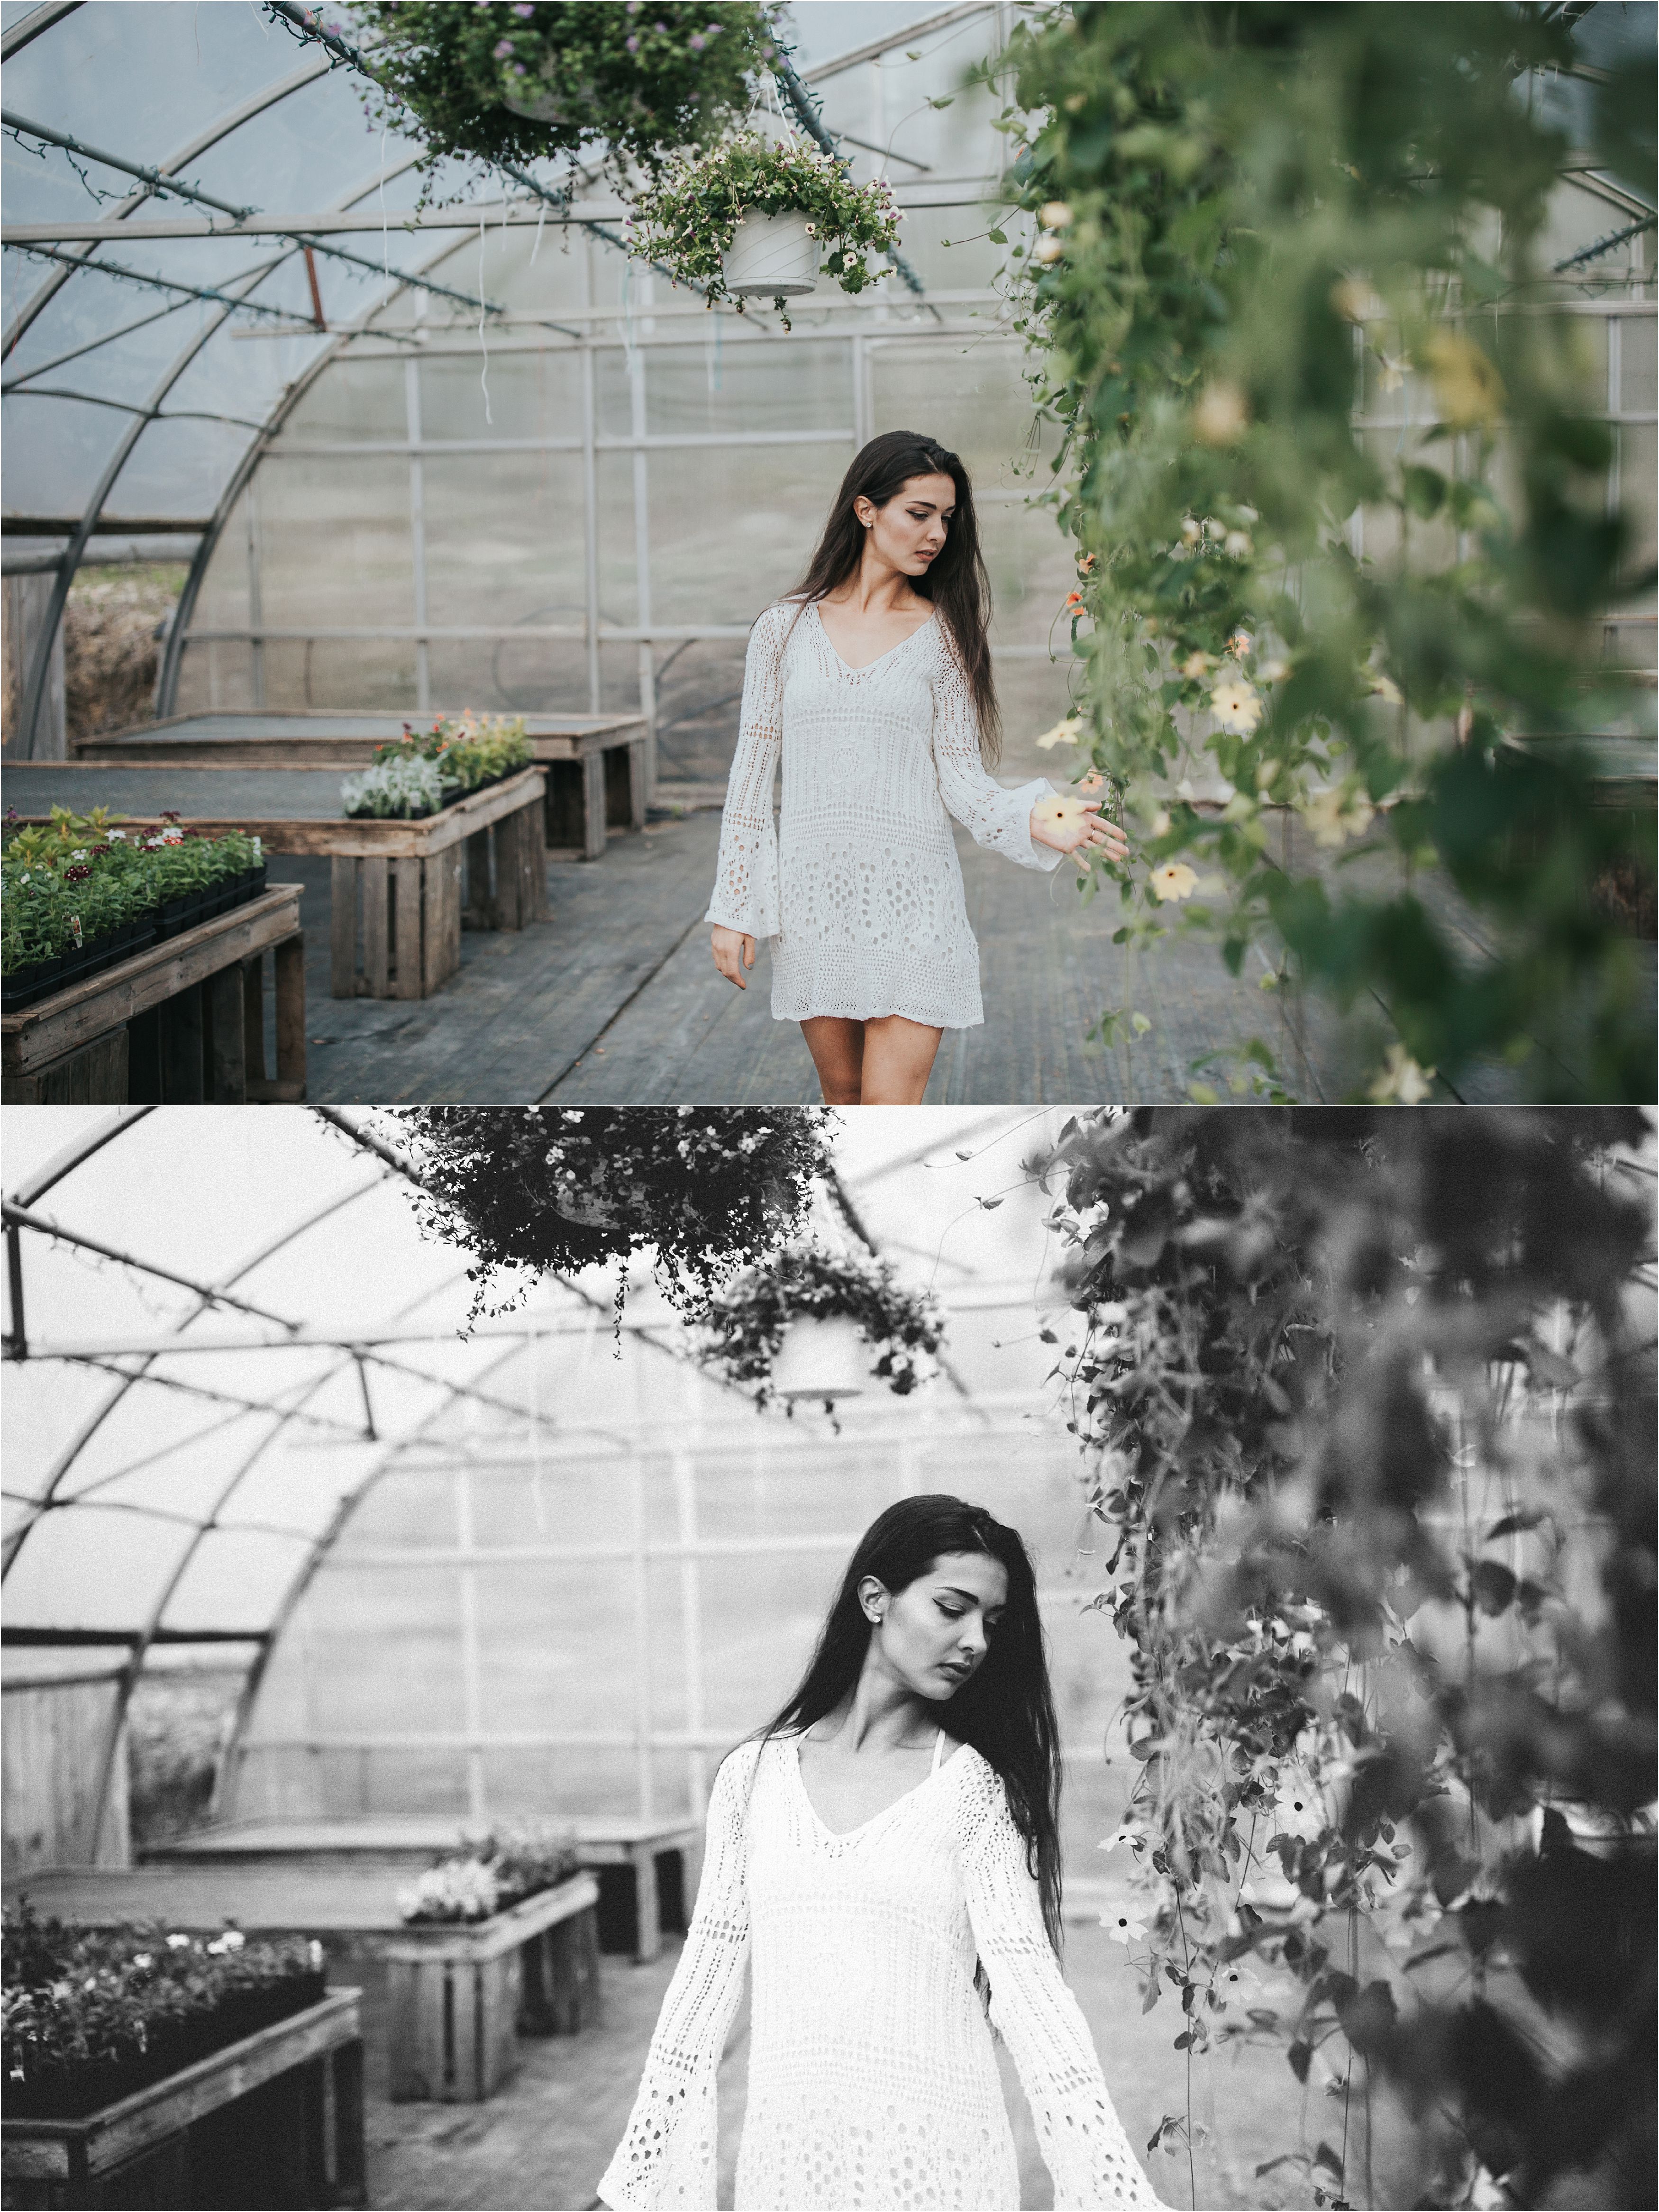 franklin pa senior portrait photos of girl at a greenhouse in the spring time